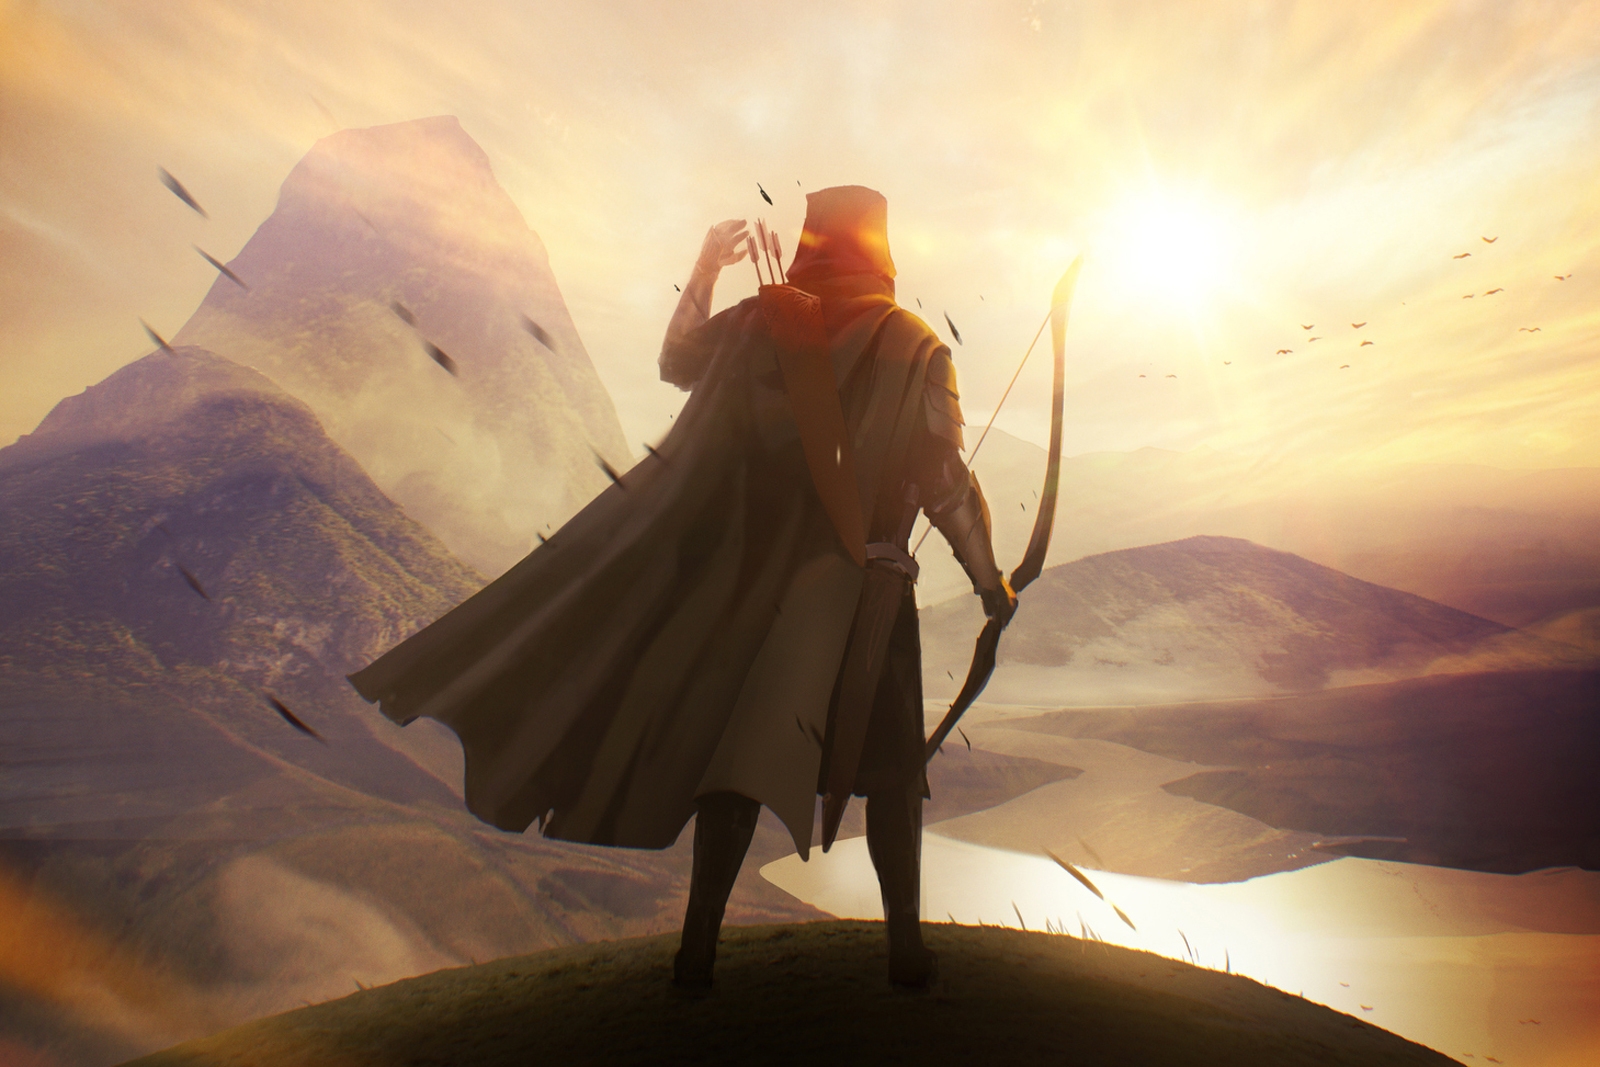 A character holding a bow and arrow looks toward a mountainous landscape illuminated by bright sunshine.